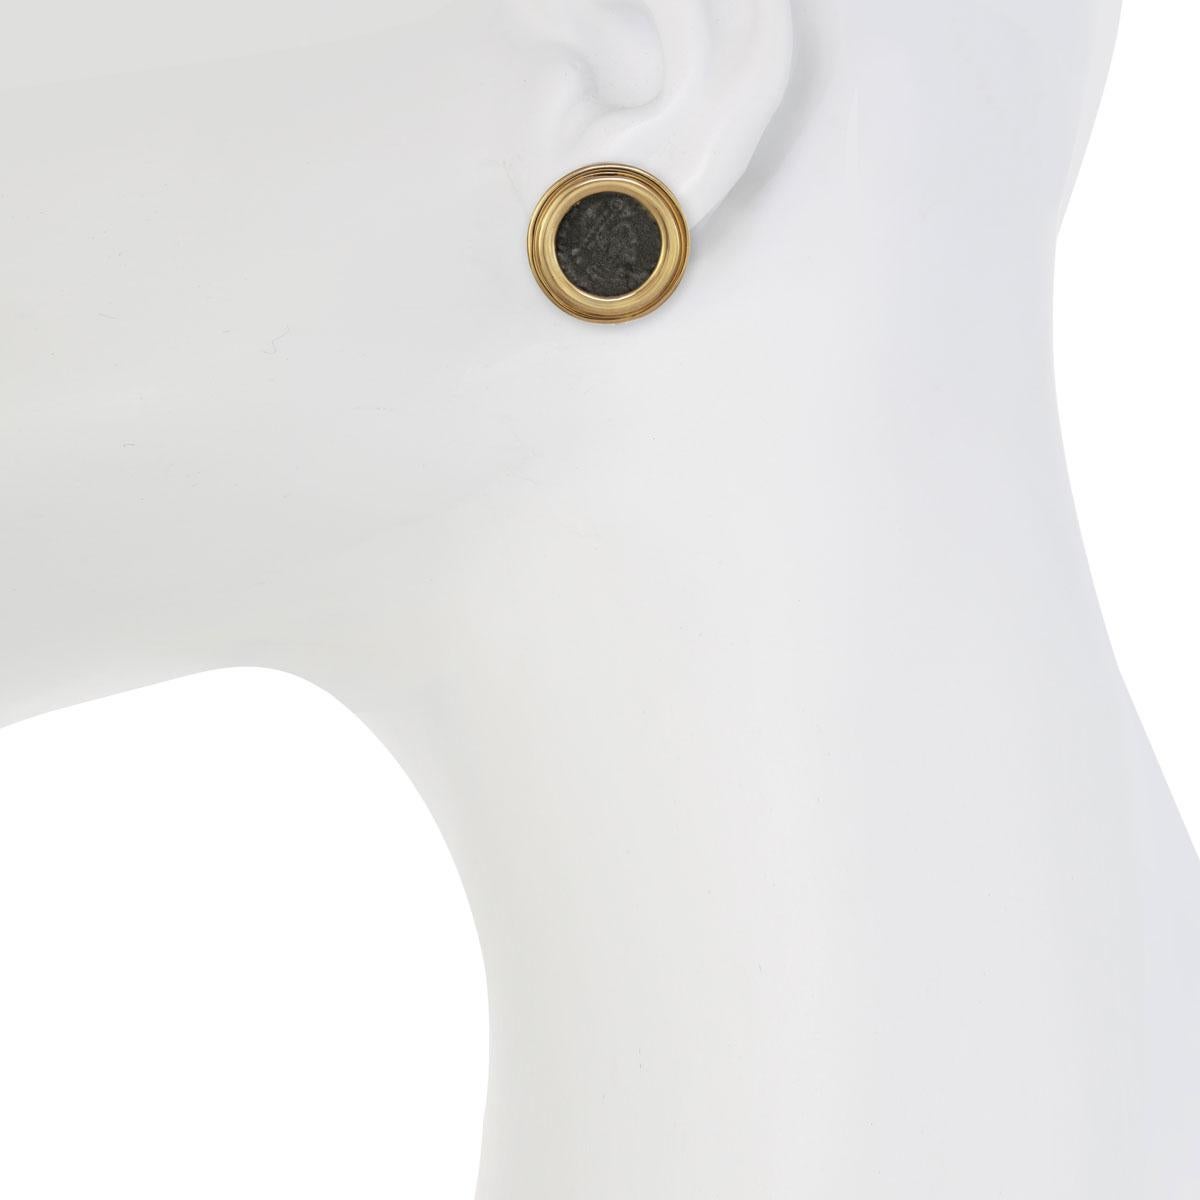 With a Roman inspired coin motif, these button earrings will be a timeless addition to your jewelry collection.

PLEASE NOTE: The pieces available are not vintage and are not reproductions.
CINER uses original models to produce our jewelry